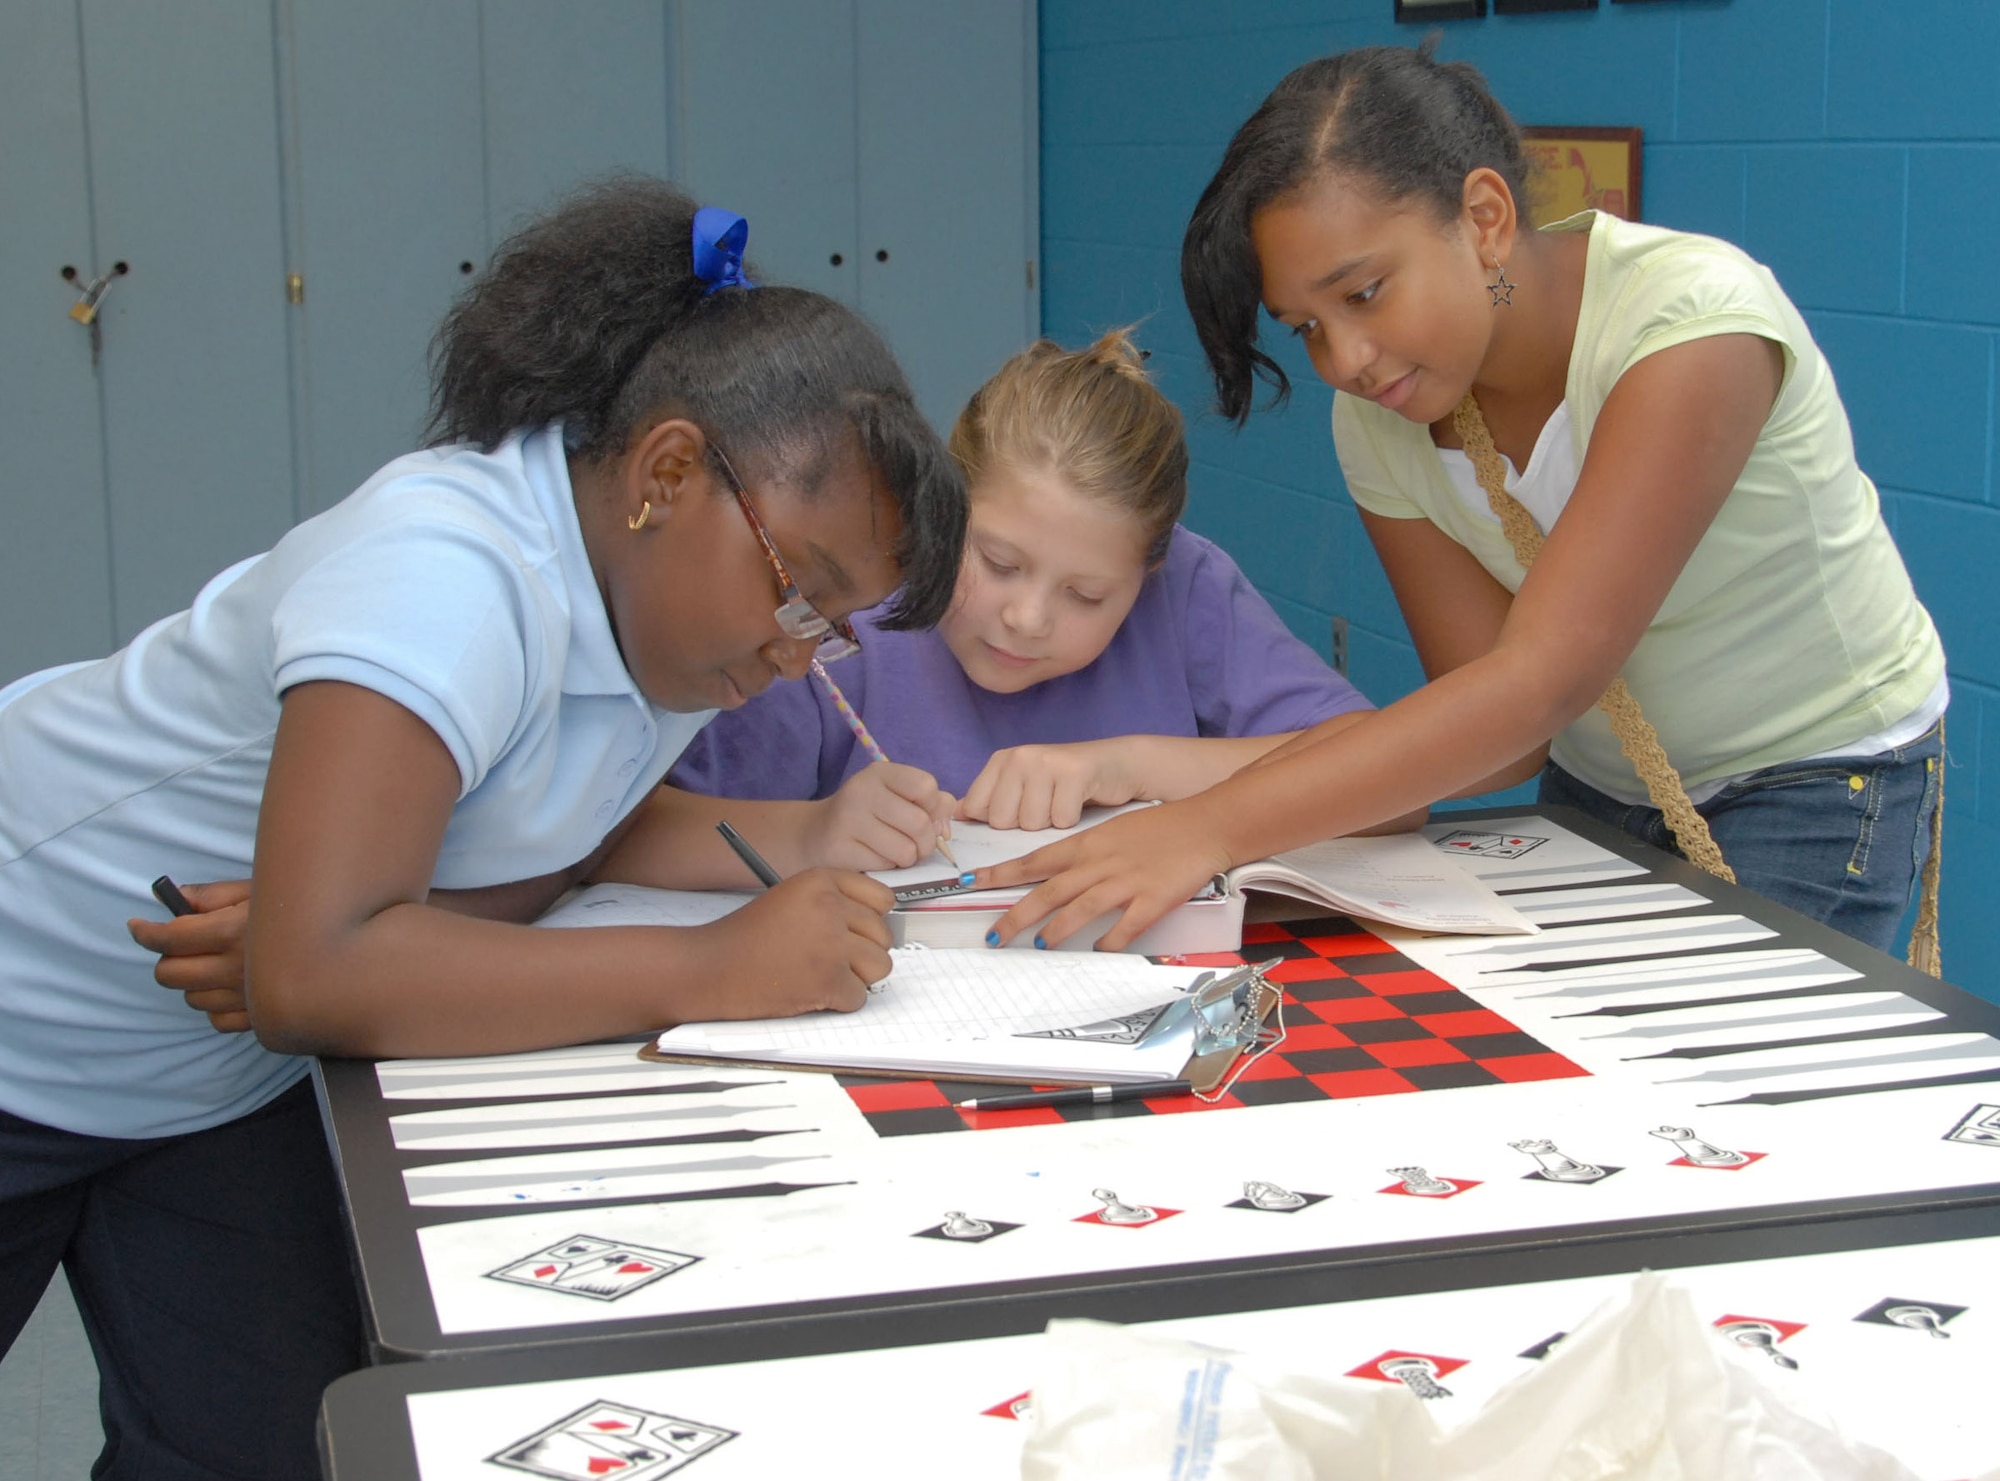 Children in the Gunter Youth Center program study together during Power Hour, the center's homework time. Shown from left are Taylor Gardner, 11, Jocelyn Stout, 12, and Denise Baylor, 11. (U.S. Air Force photo/Roger Curry)